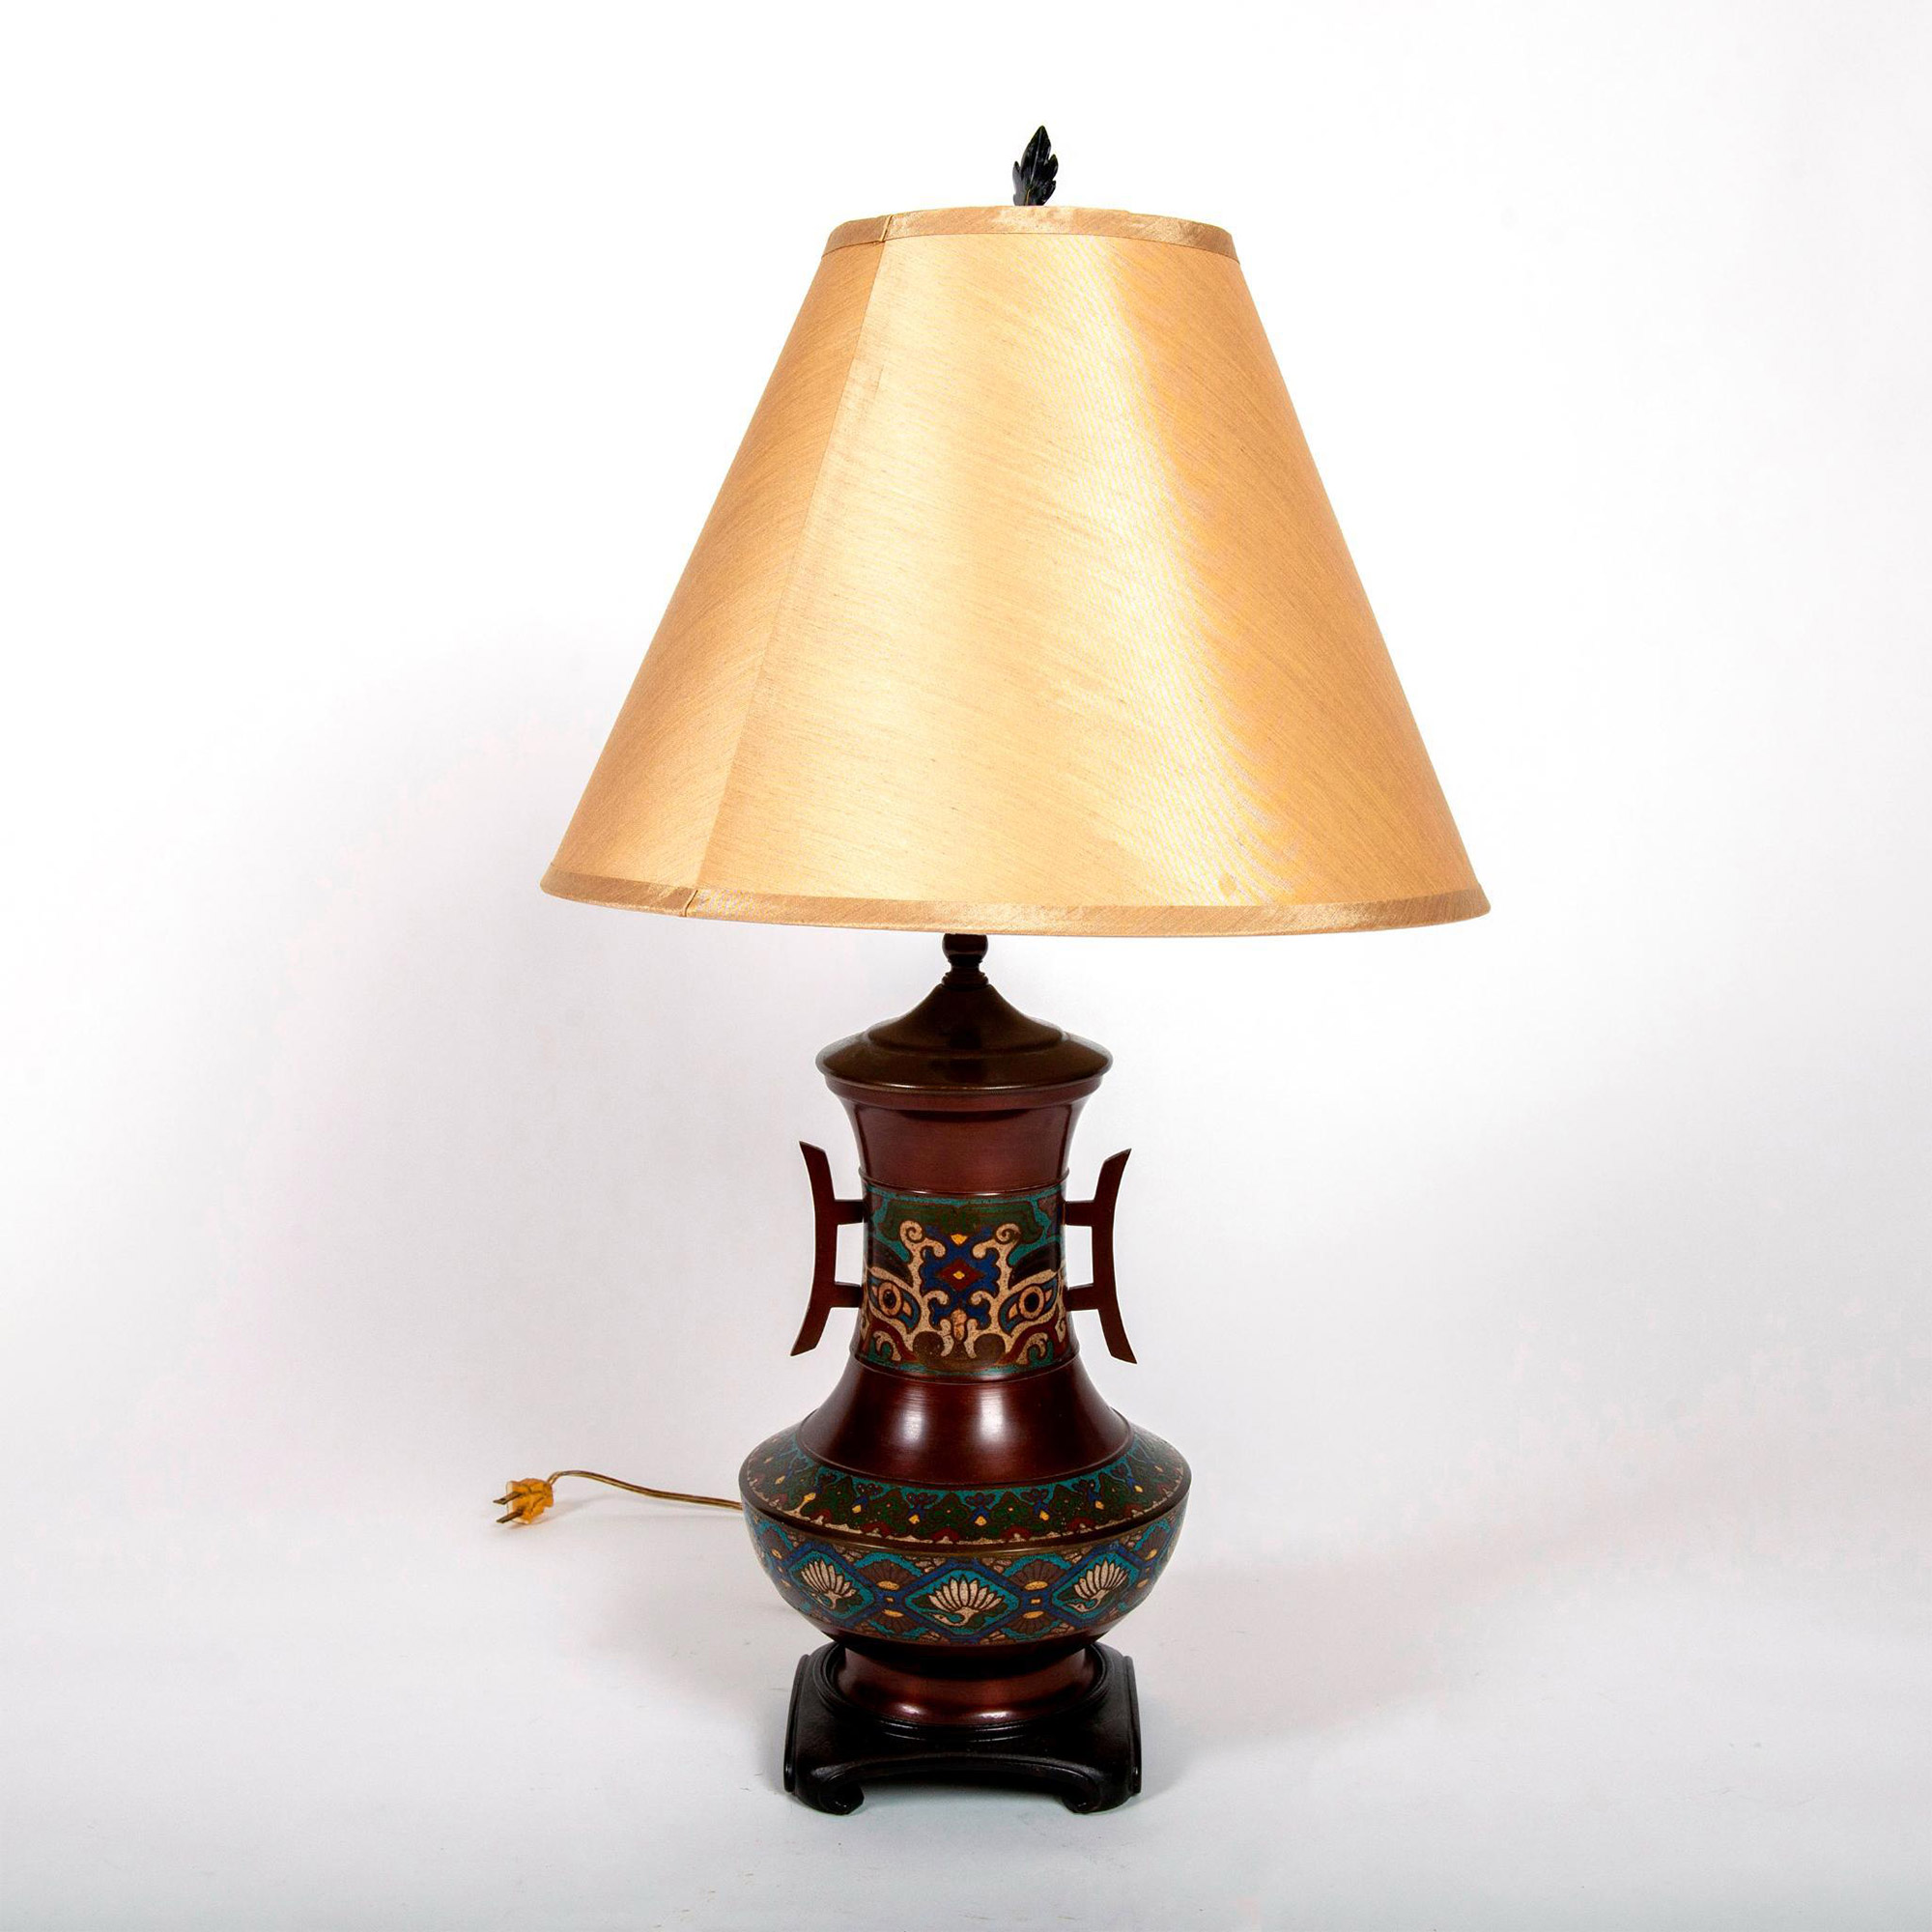 Vintage Chinese Cloisonne Table Lamp - Image 5 of 5